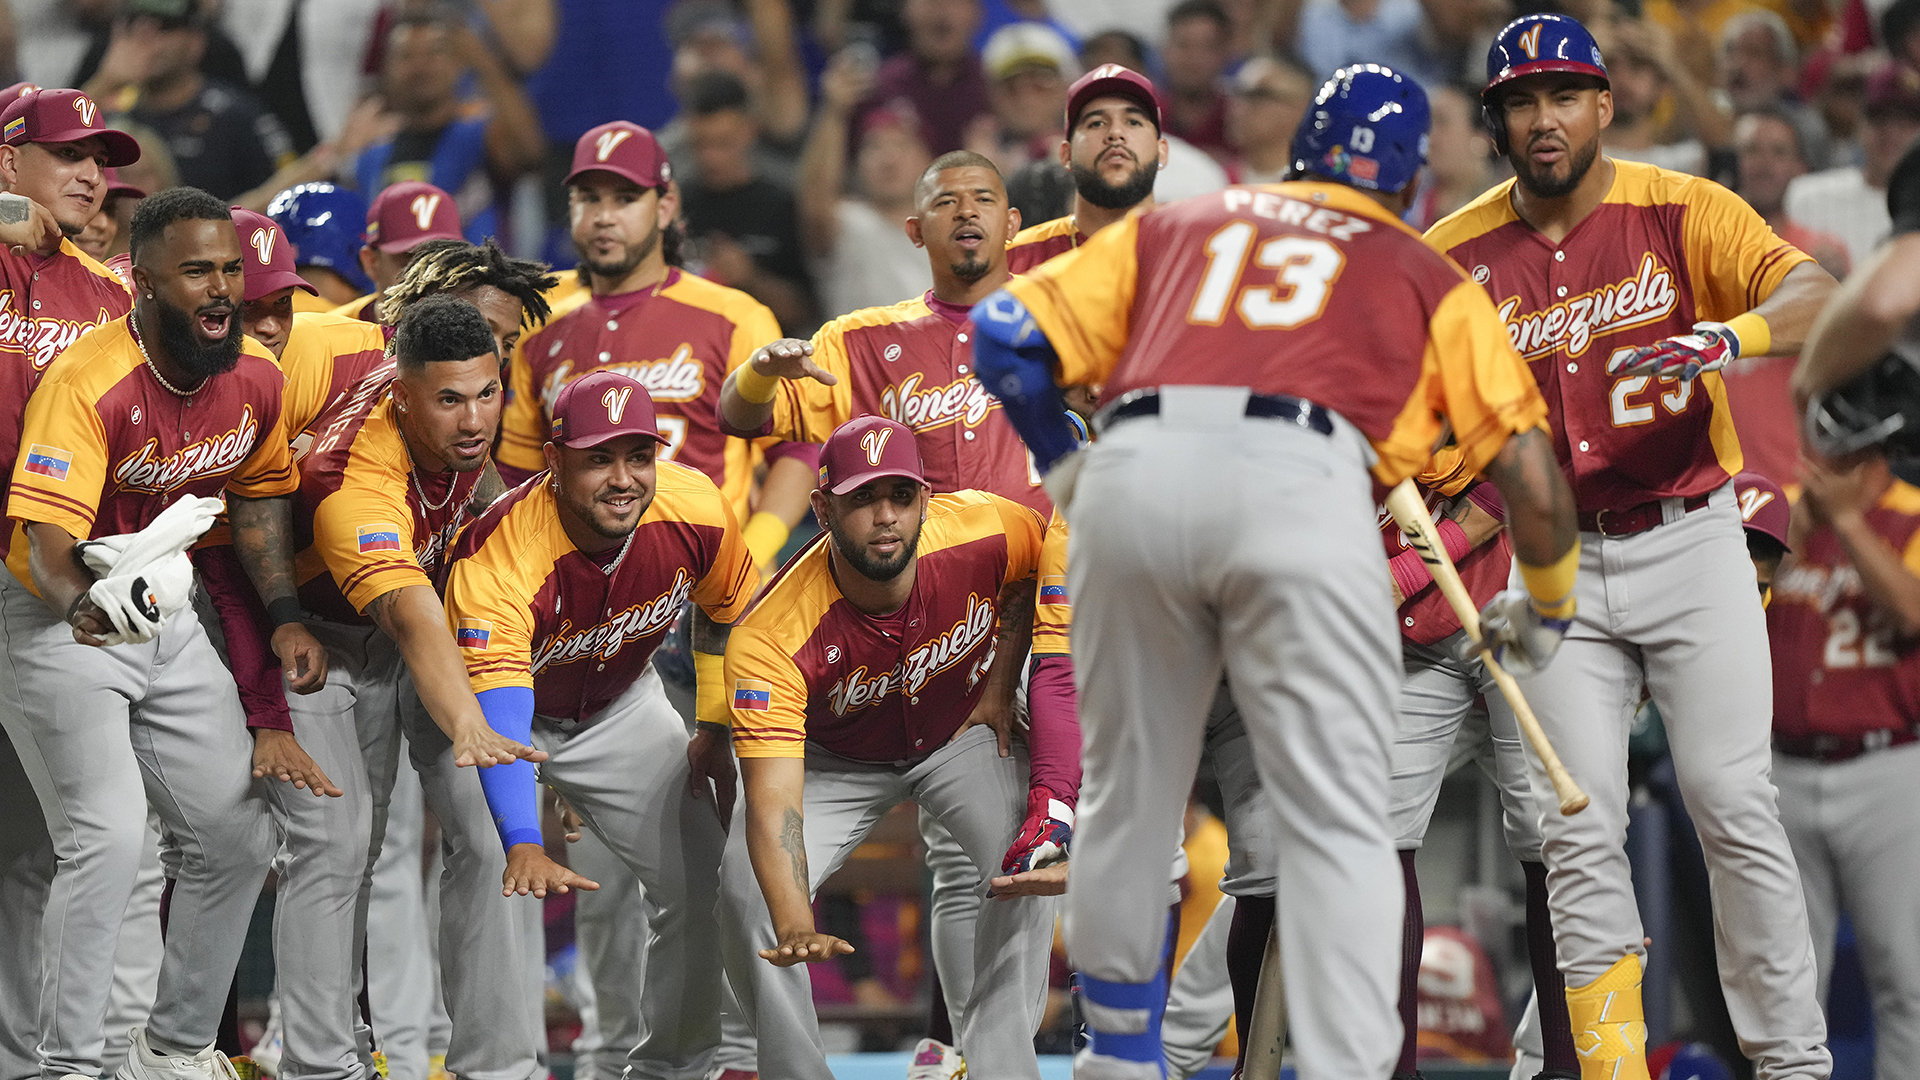 MIAMI, FLORIDA - MARCH 12: Salvador Perez #13 of Venezuela celebrates with teammates after hitting a home run in the second inning against Puerto Rico at loanDepot park on March 12, 2023 in Miami, Florida.